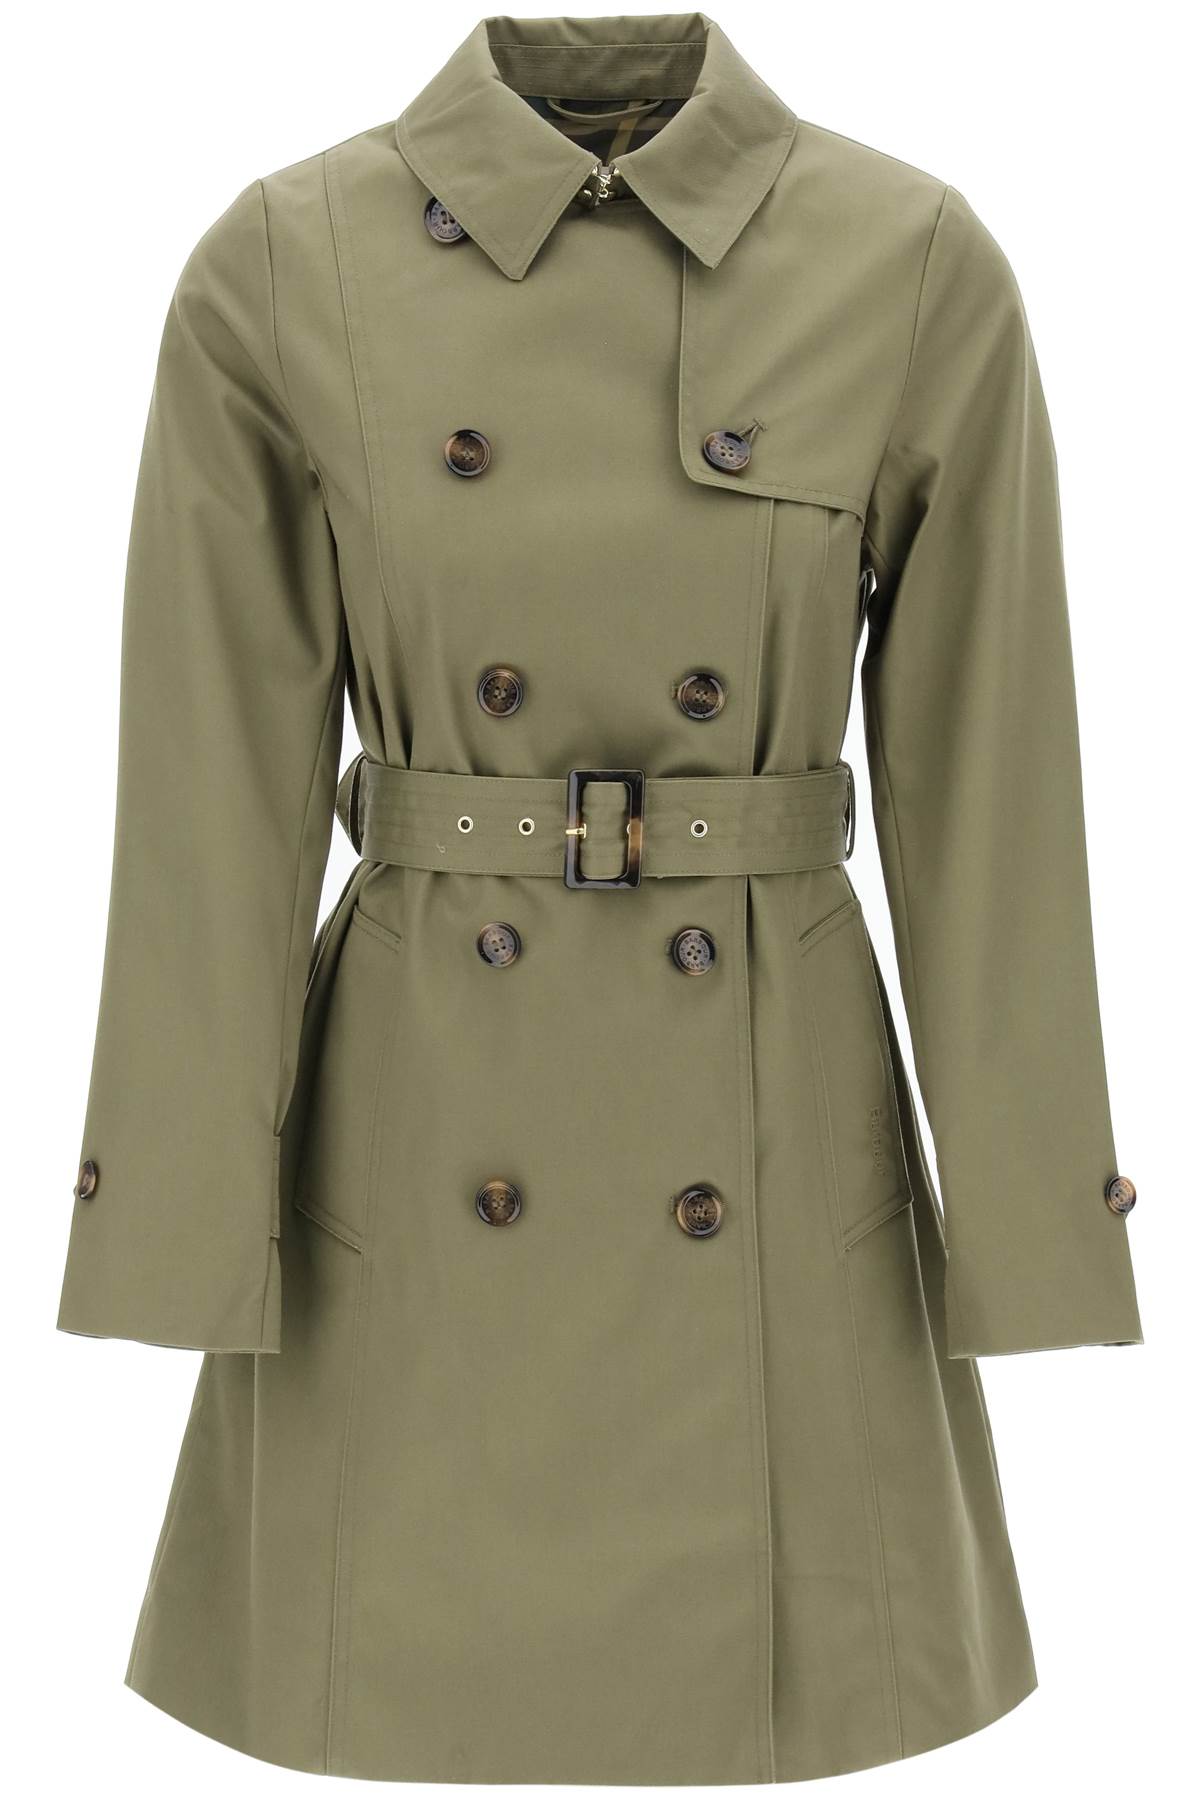 Barbour double-breasted trench coat for-0